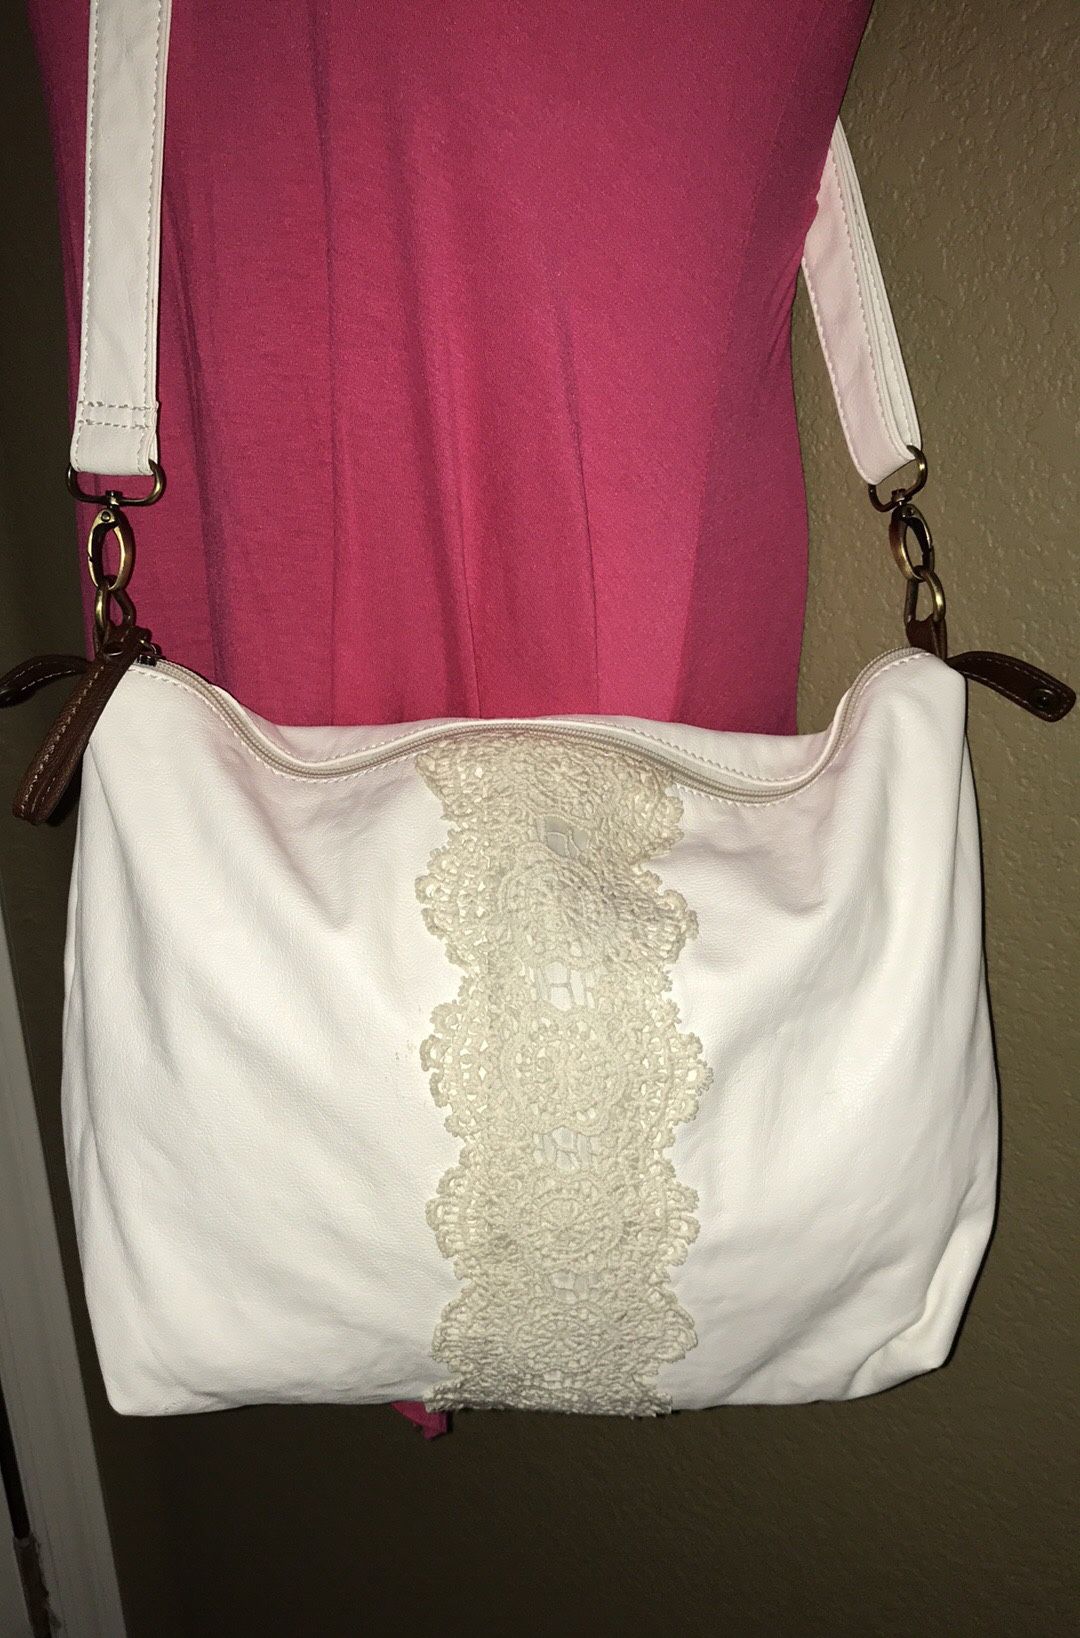 YIK FUNG PURSE for Sale in Portland, OR - OfferUp